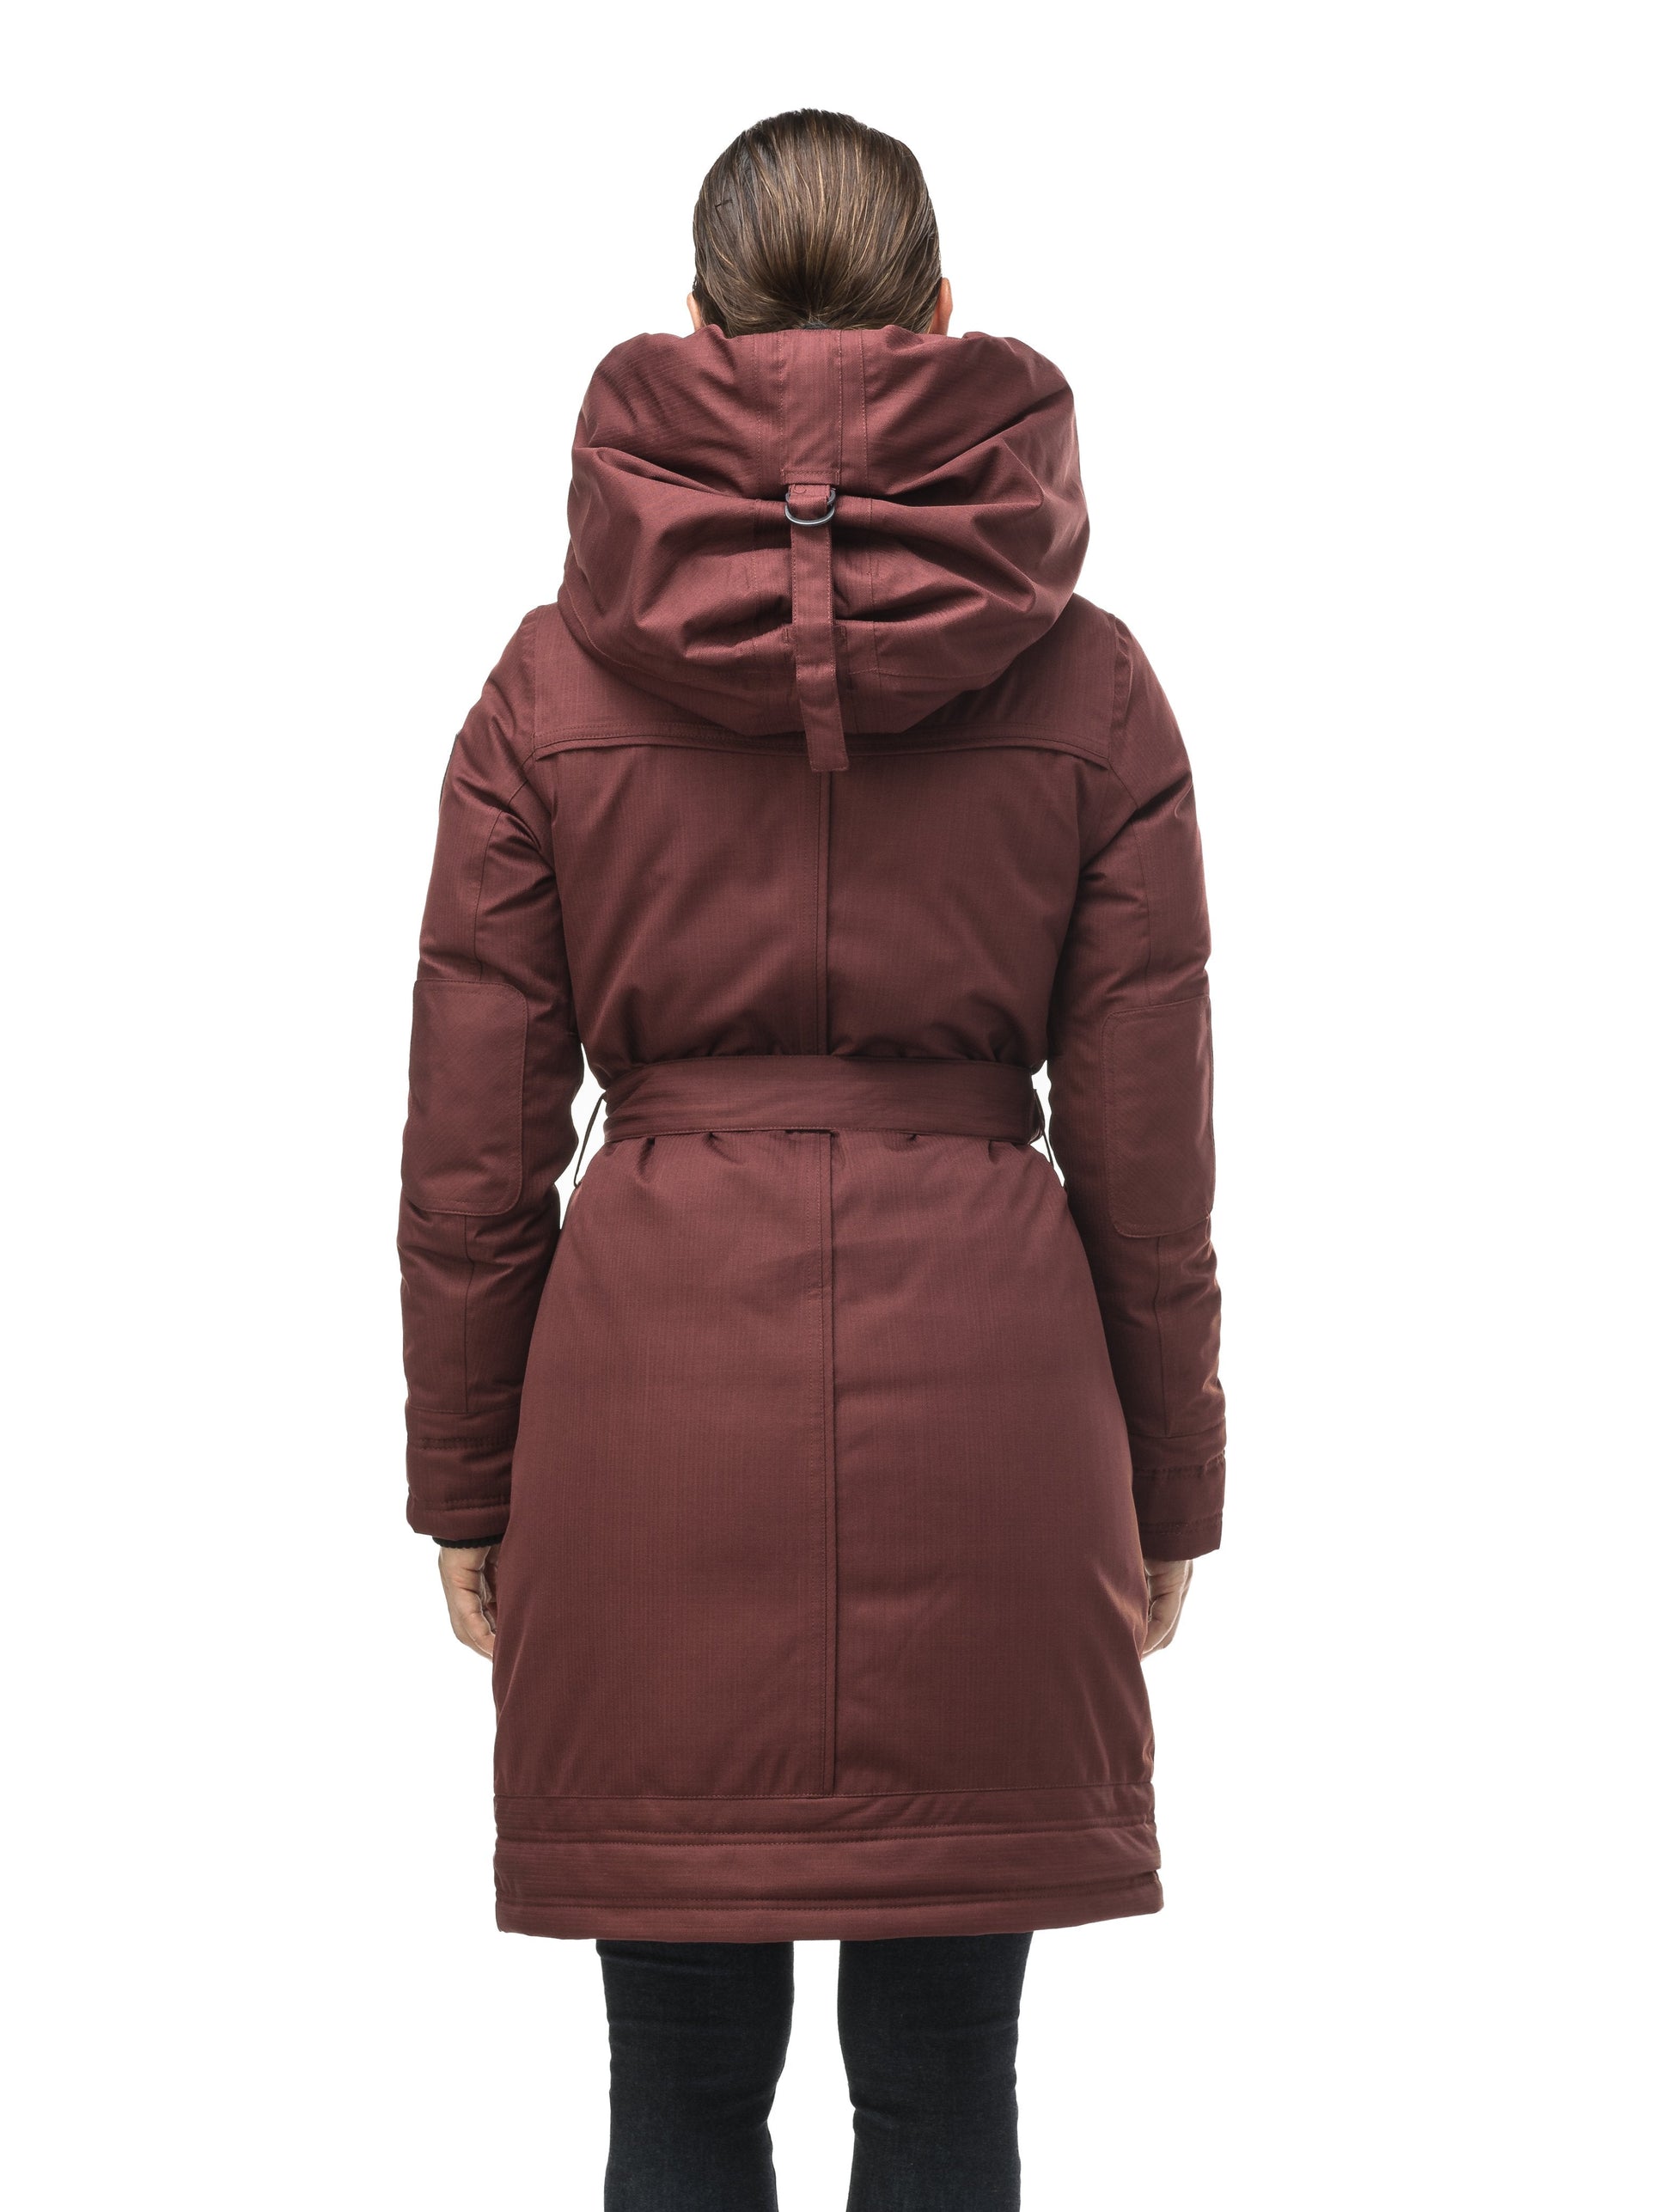 Women's Thigh length own parka with a furless oversized hood in CH Red Rum